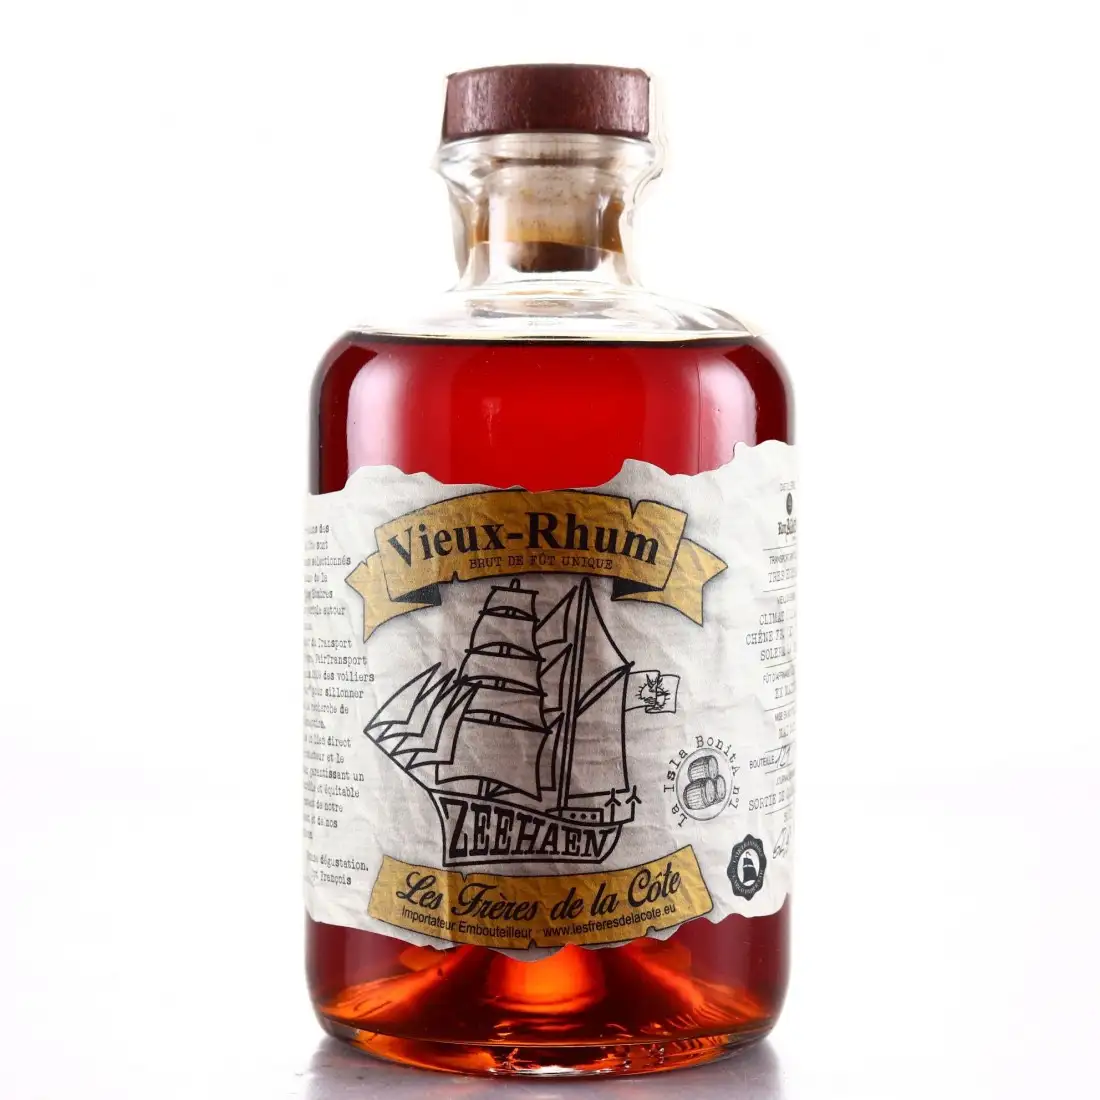 Image of the front of the bottle of the rum Vieux-Rhum